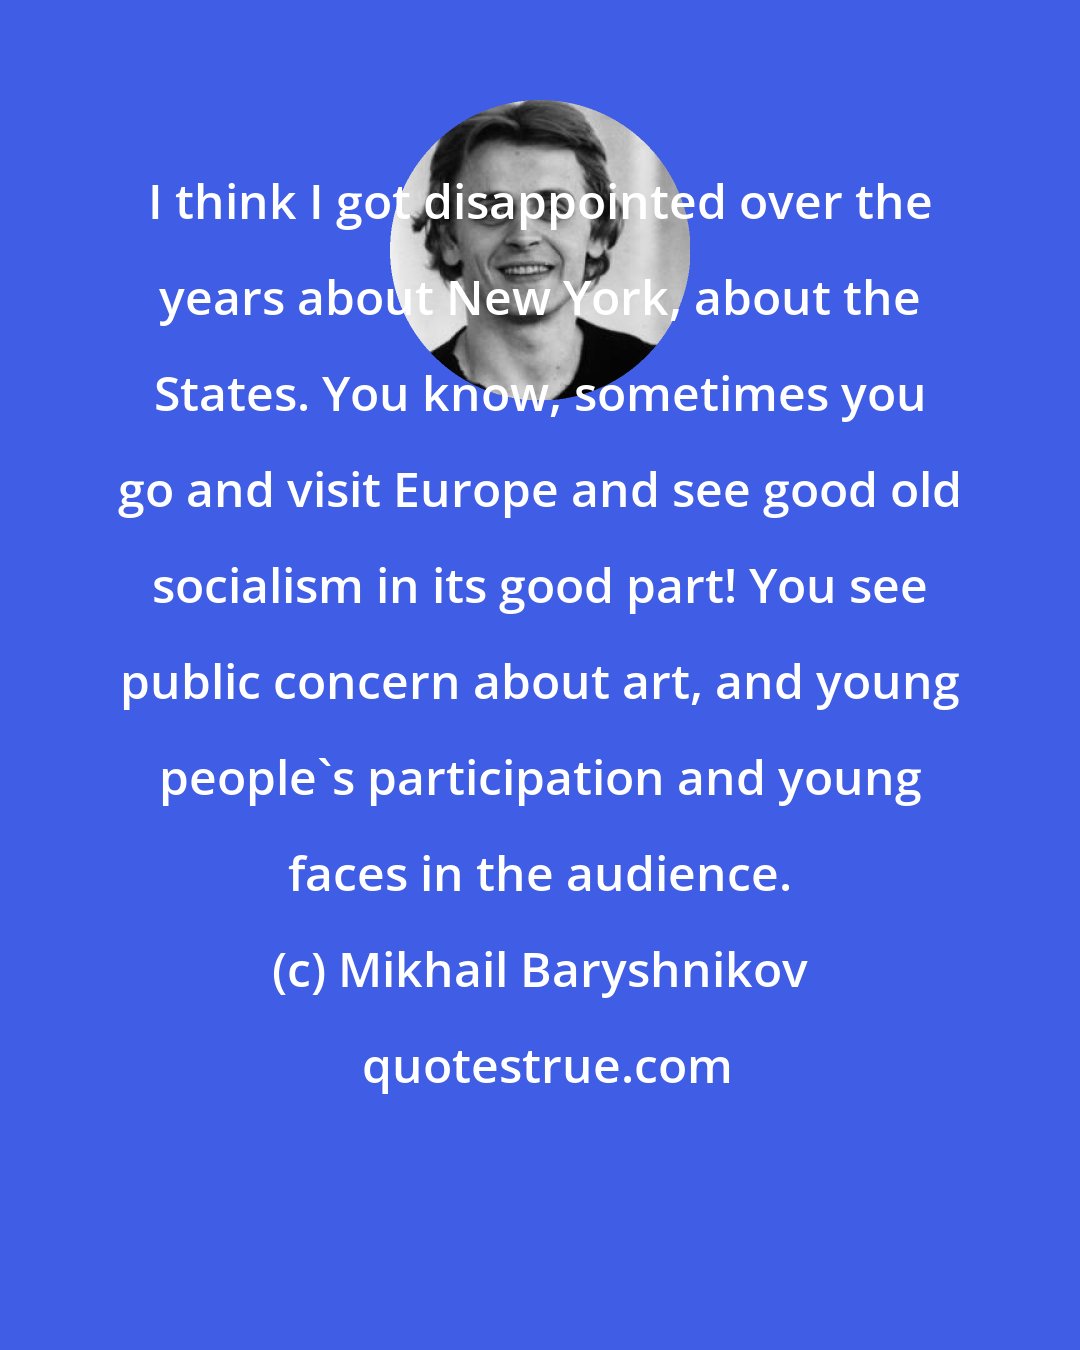 Mikhail Baryshnikov: I think I got disappointed over the years about New York, about the States. You know, sometimes you go and visit Europe and see good old socialism in its good part! You see public concern about art, and young people's participation and young faces in the audience.